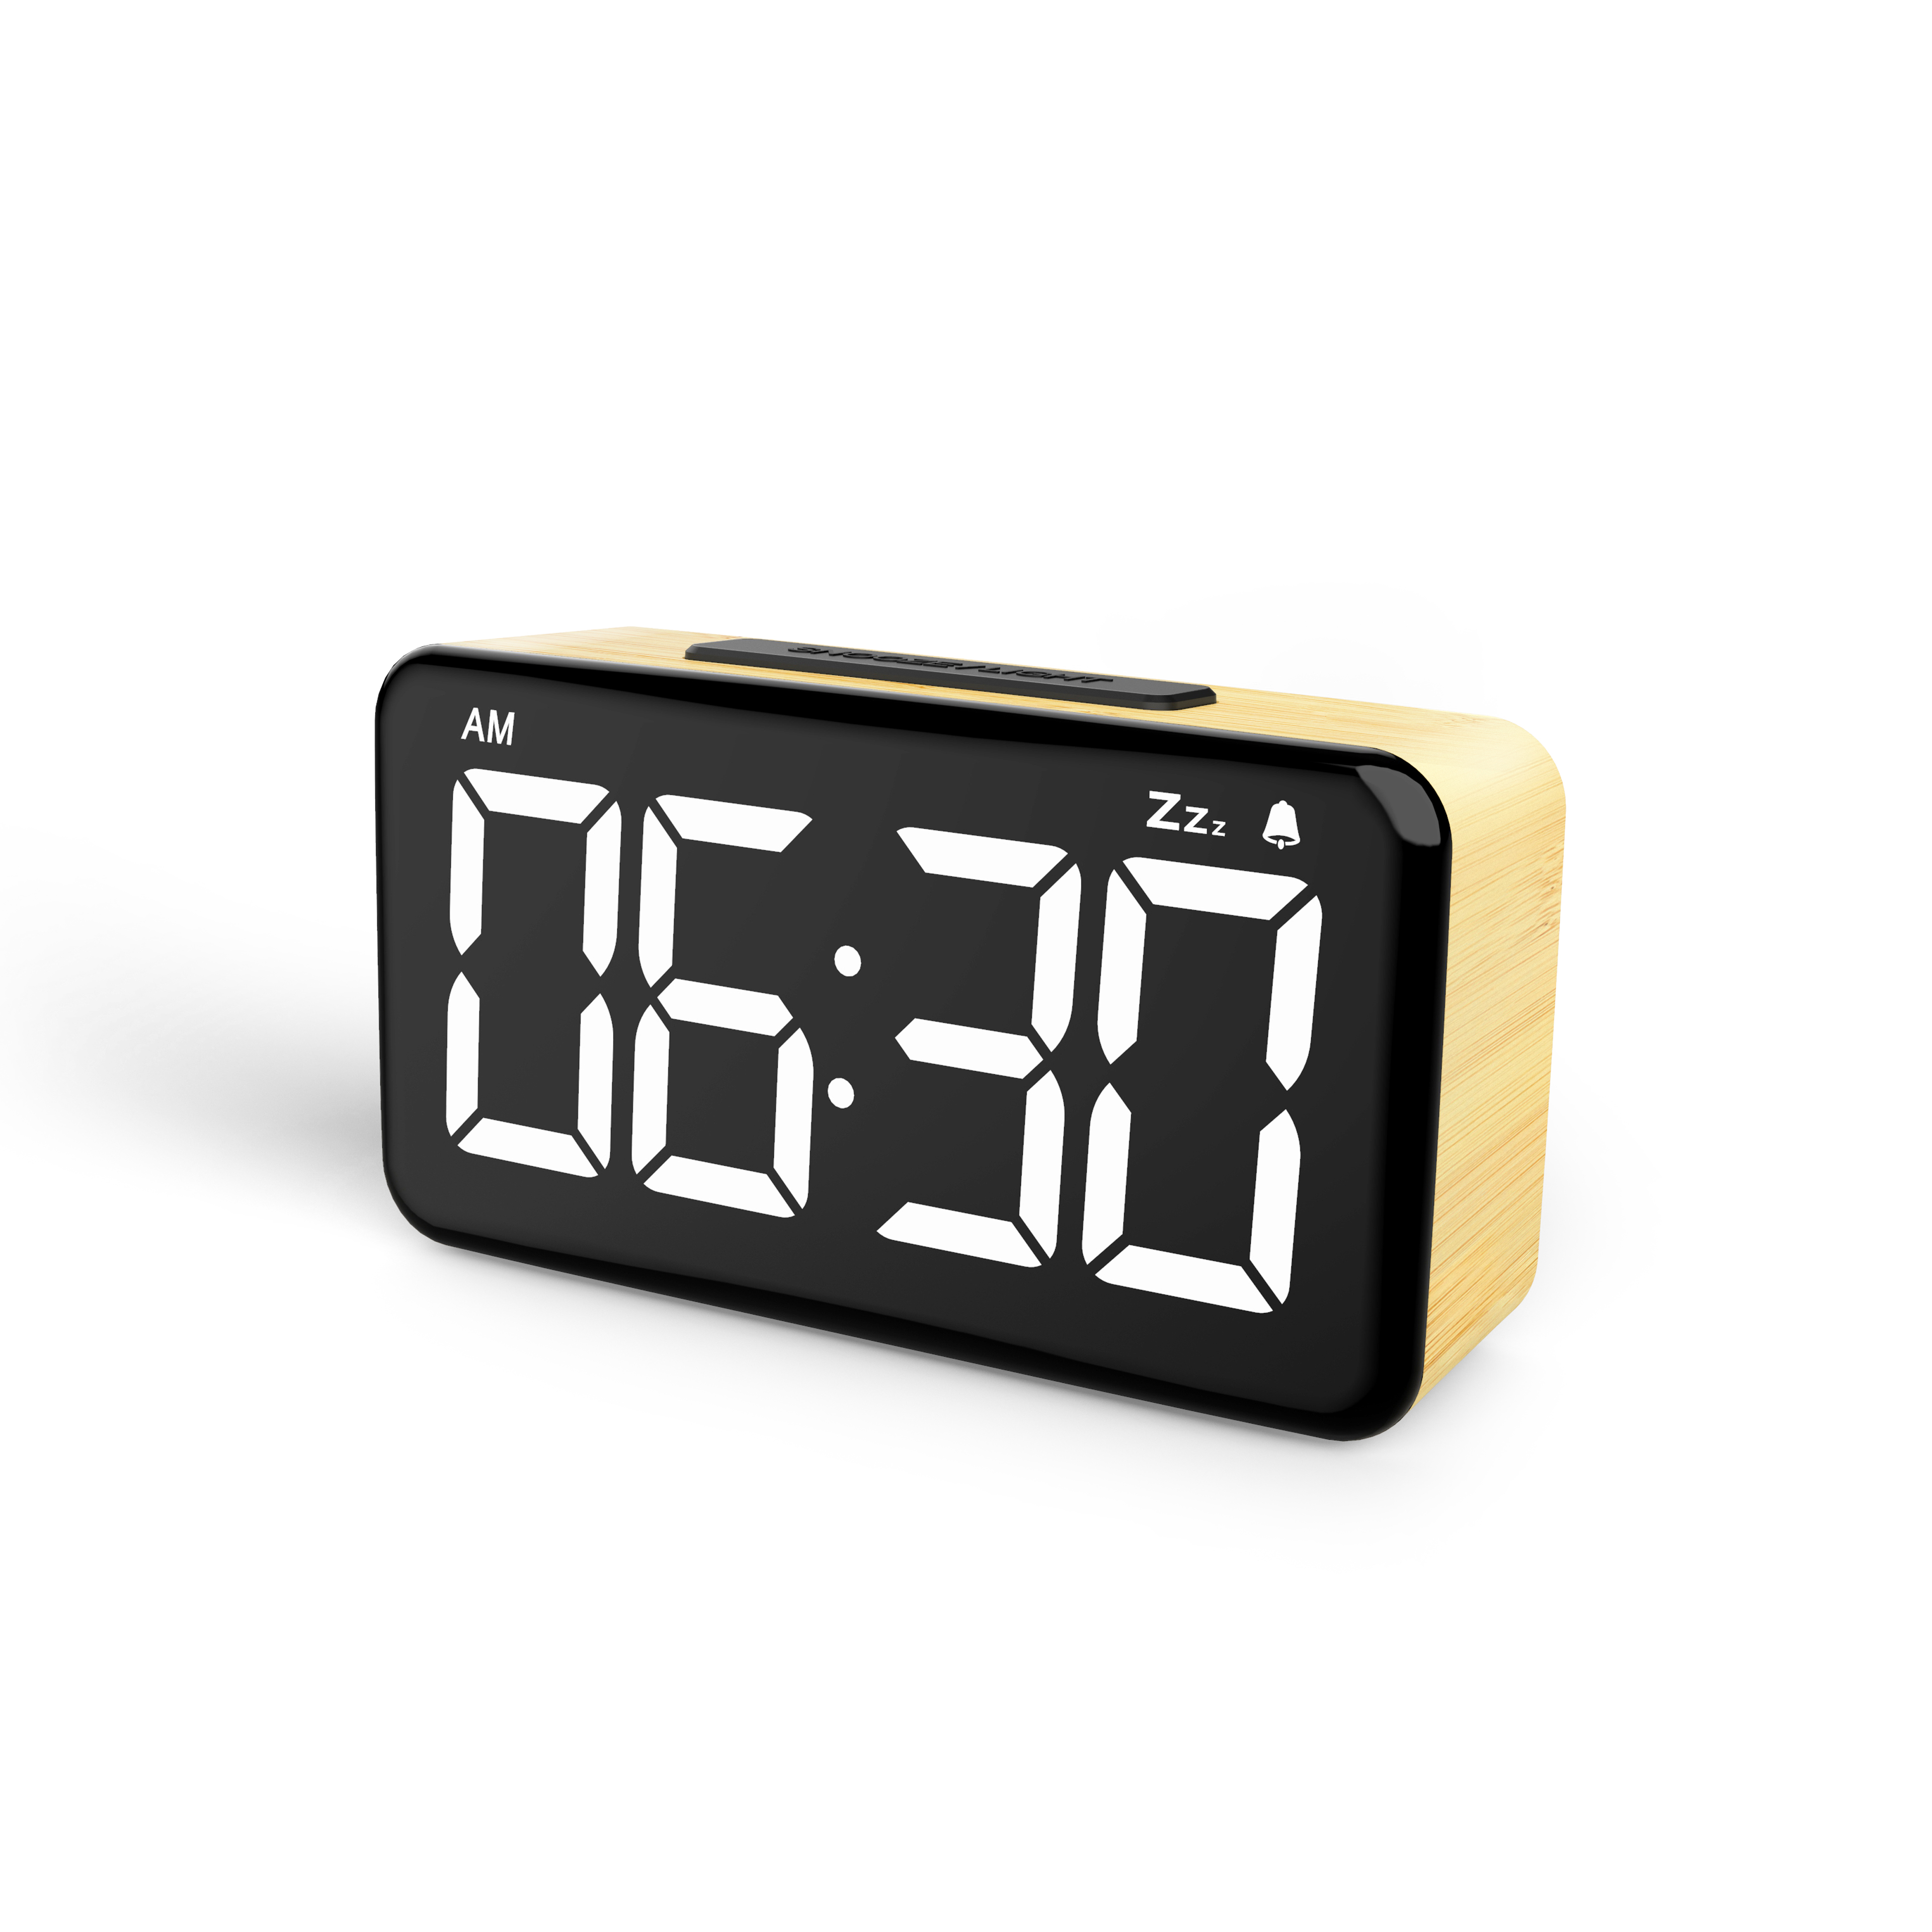 Digital Alarm Clock 6 Inch LED Digit Display Wood Grain Alarm Clock with Snooze Function, 6 Levels of Dimming Brightness, USB Rechargeable, Modern Minimalist Style Alarm Clock for Bedroom Decor, Desk, Bedside, Office